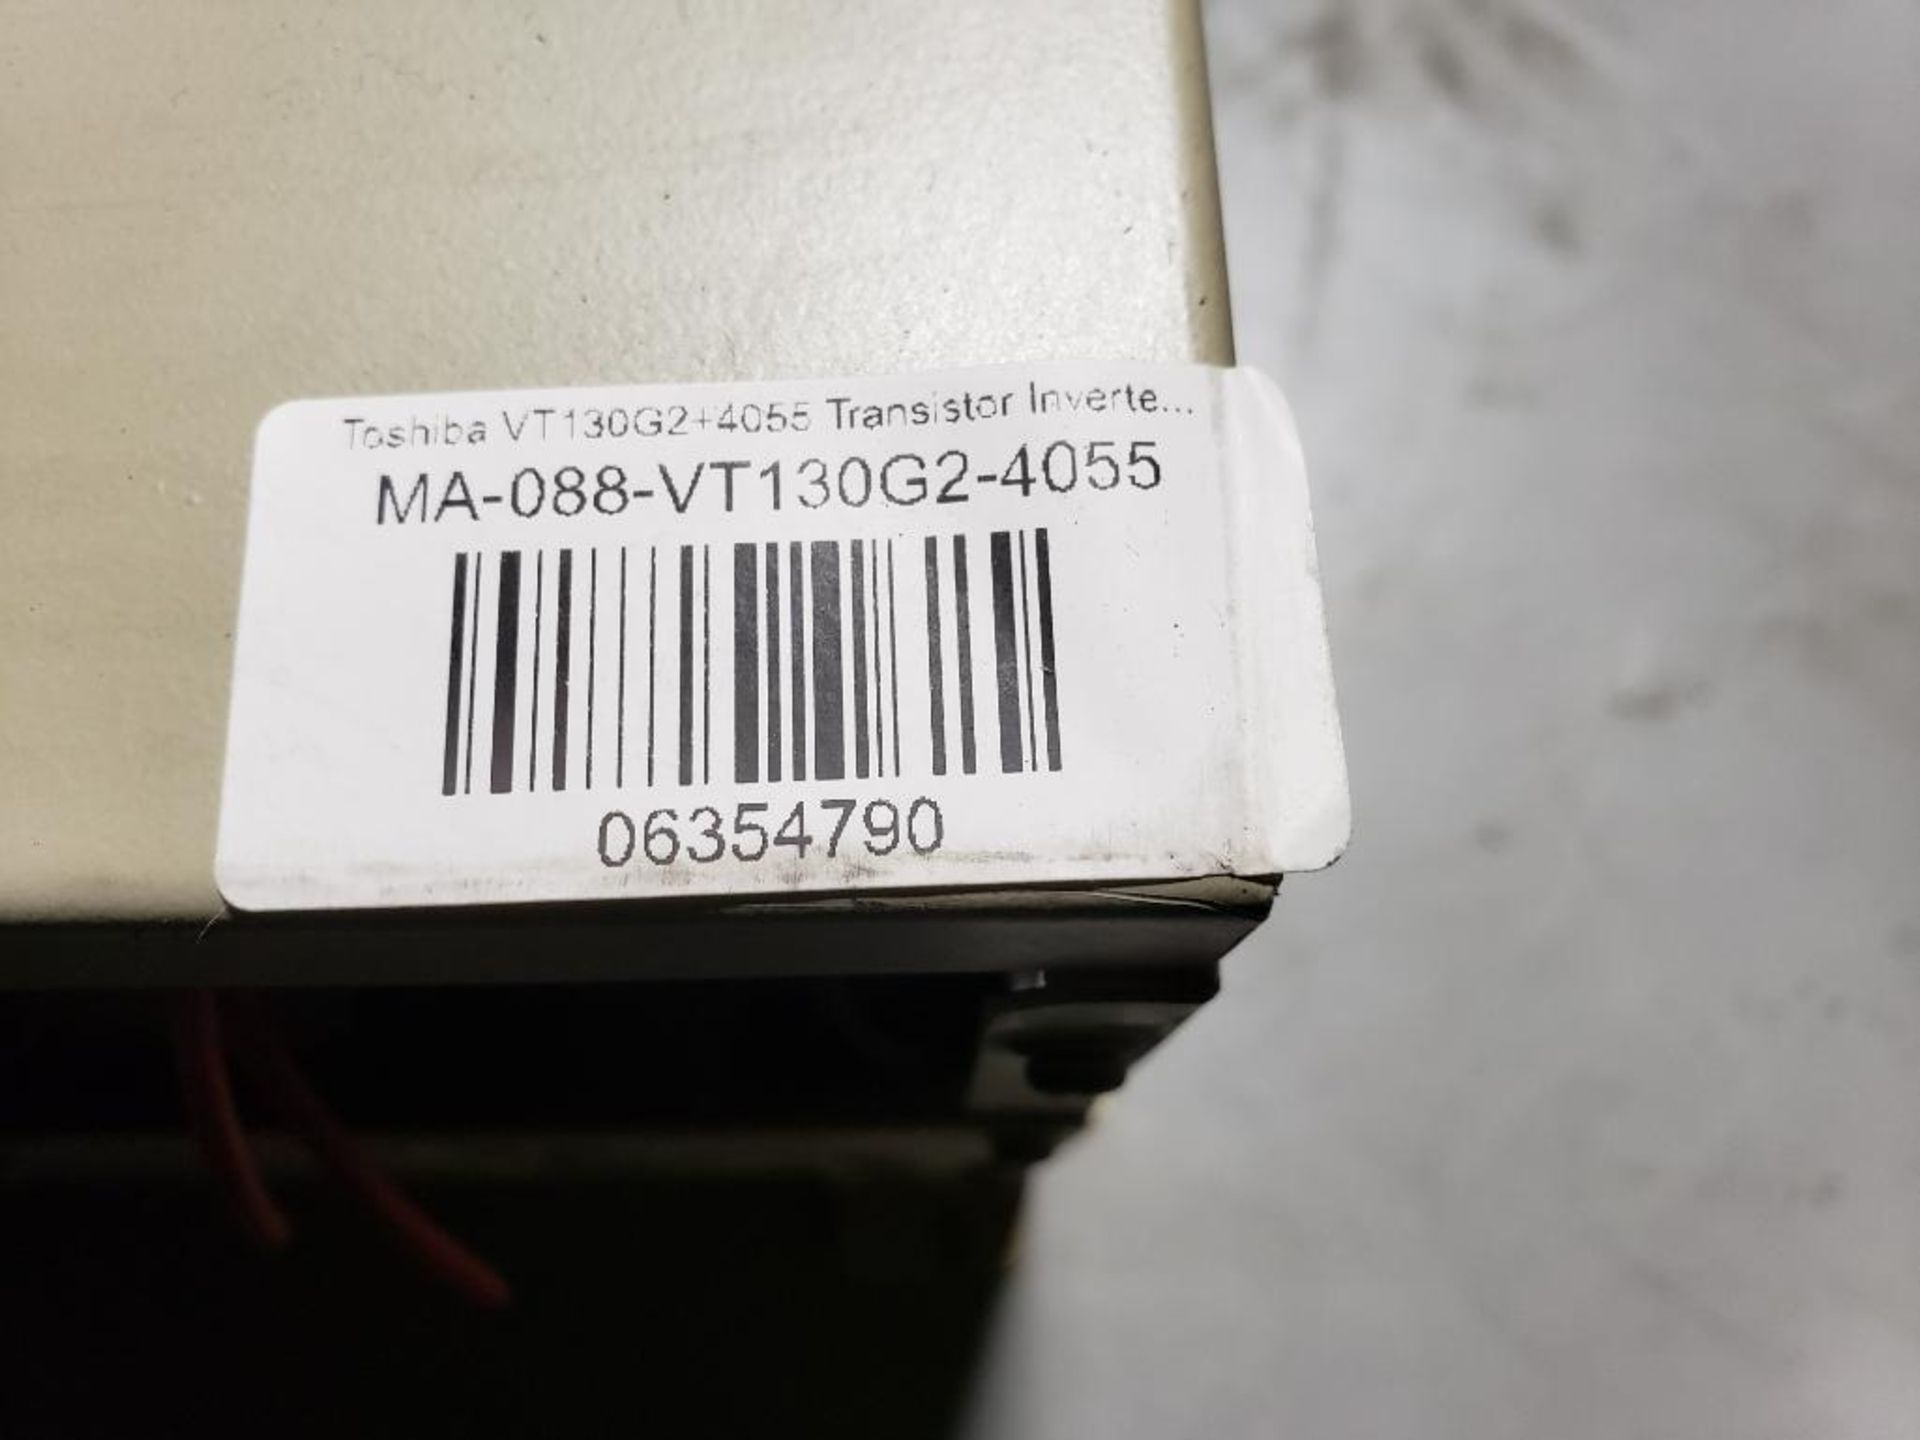 Toshiba Tosvert-130g2+ drive. Part number VT120G2+4055. - Image 4 of 7